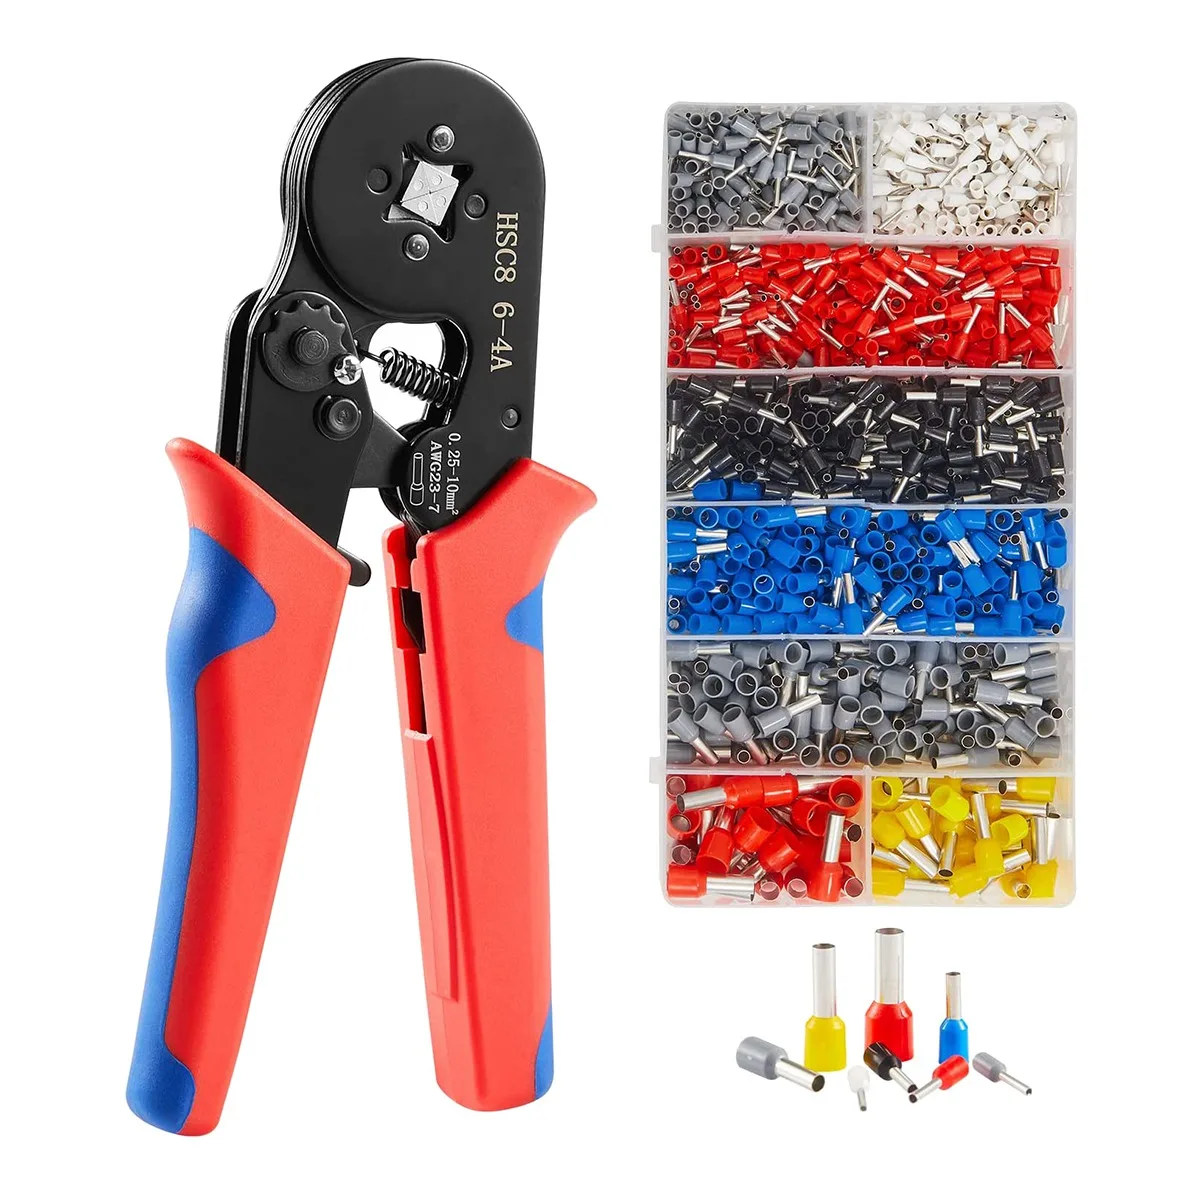 

Crimping Tools Wire Pliers - 1250 PCS Wire Ferrules with Crimpers Pliers Kit for Electricians Adjustable Ratchet Tools